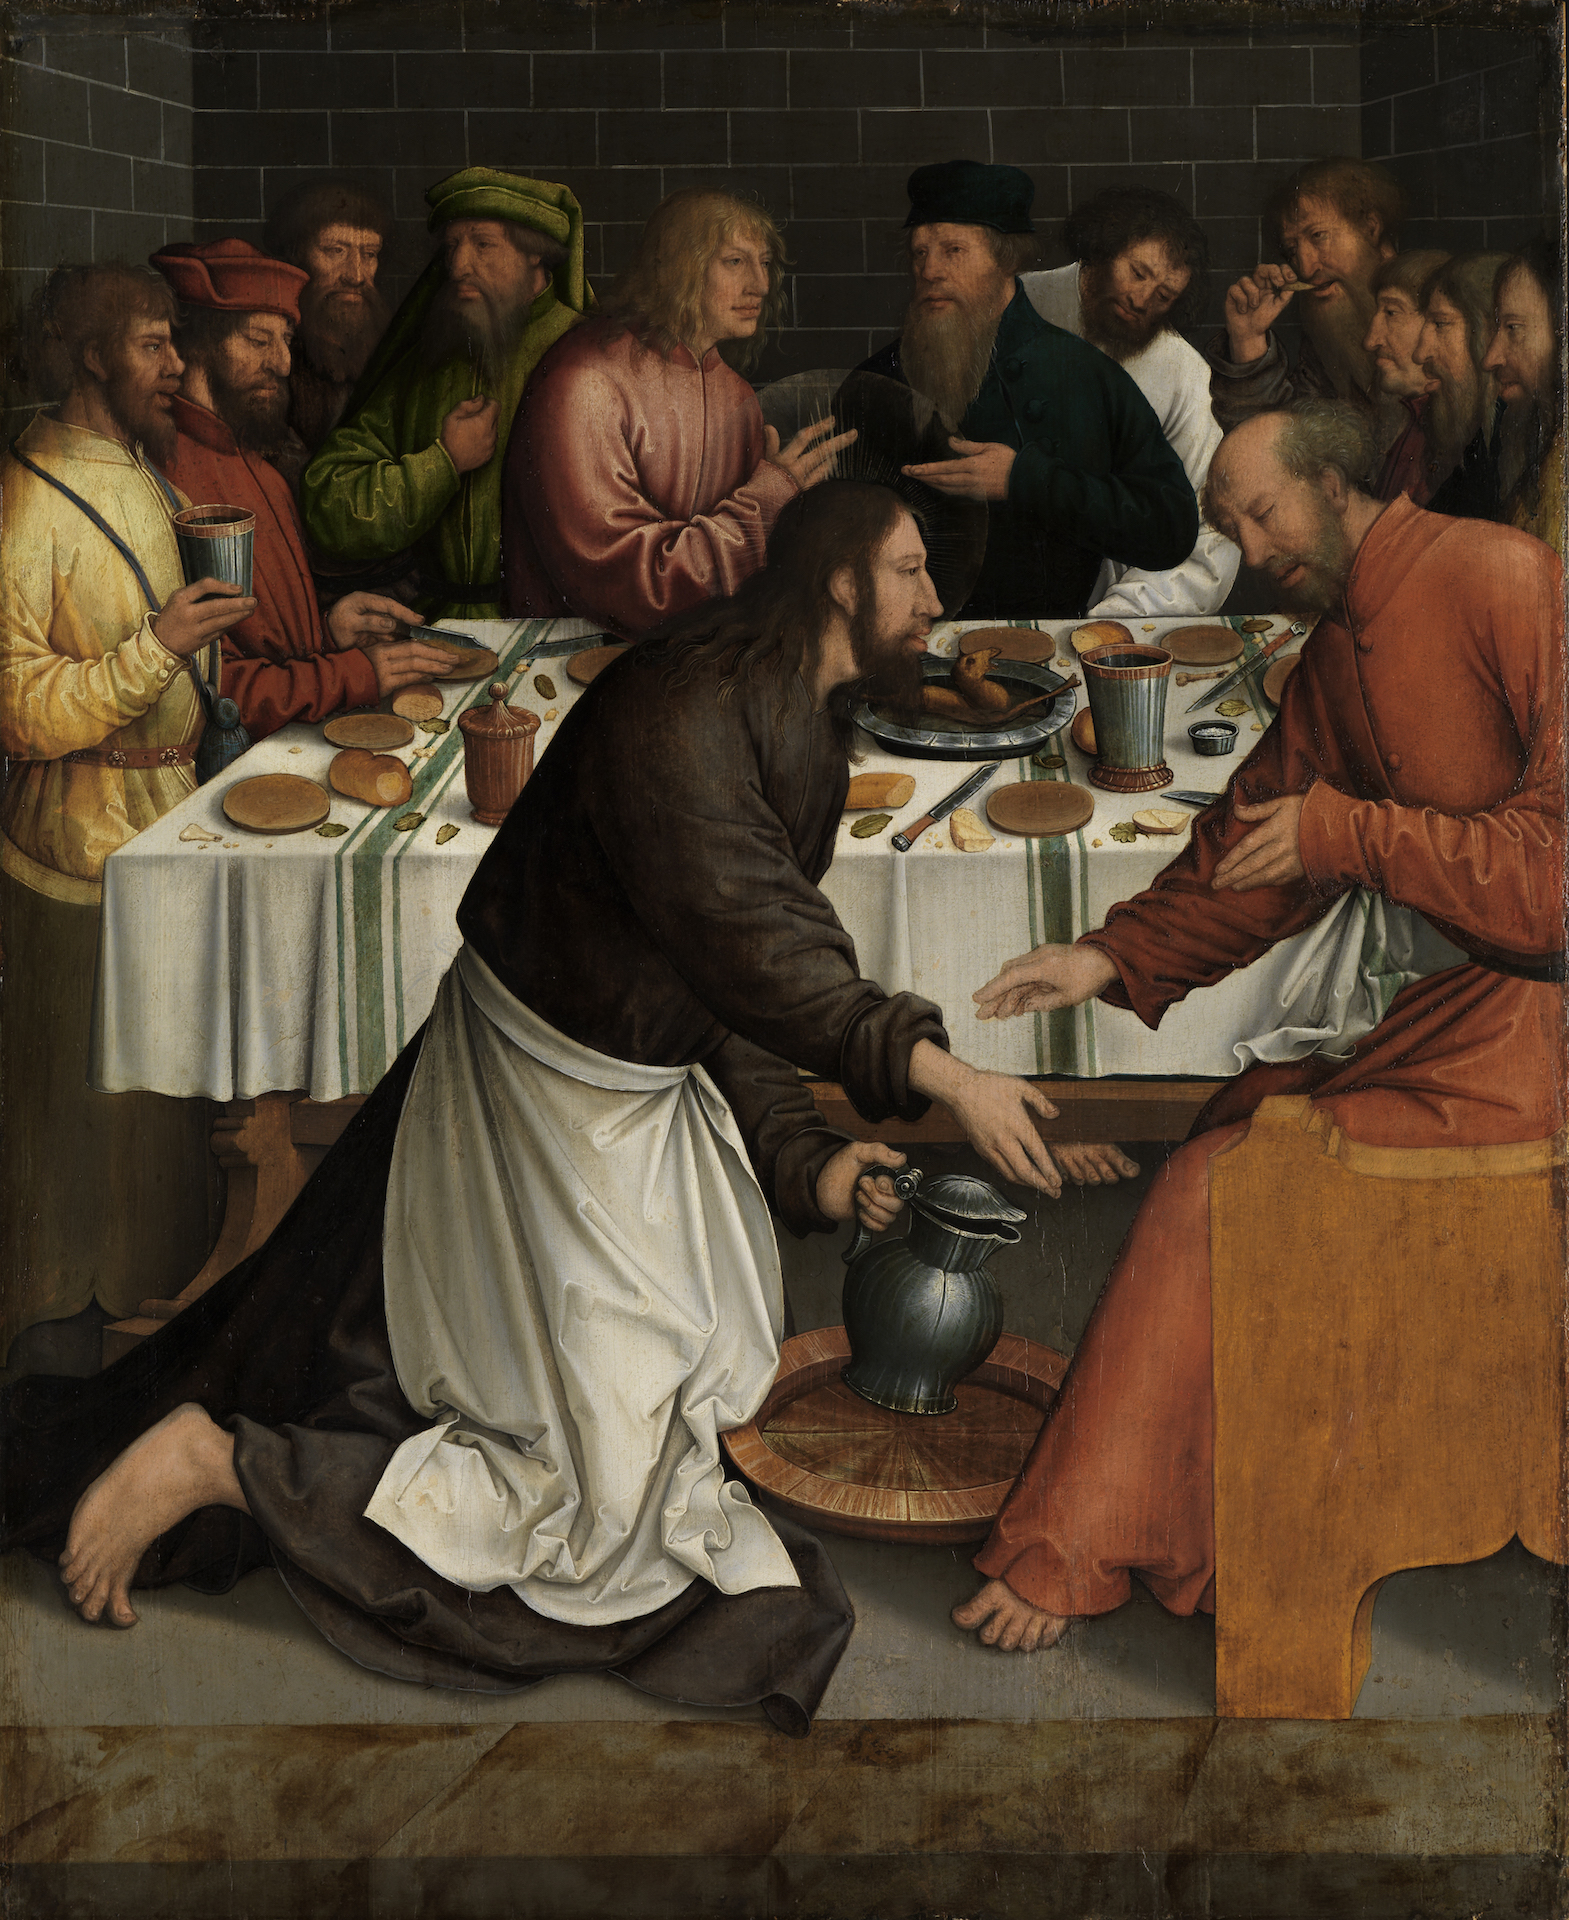 Painting by Bernhard Strigel showing Christ washing his feet. Jesus kneels before another man and washes his feet.